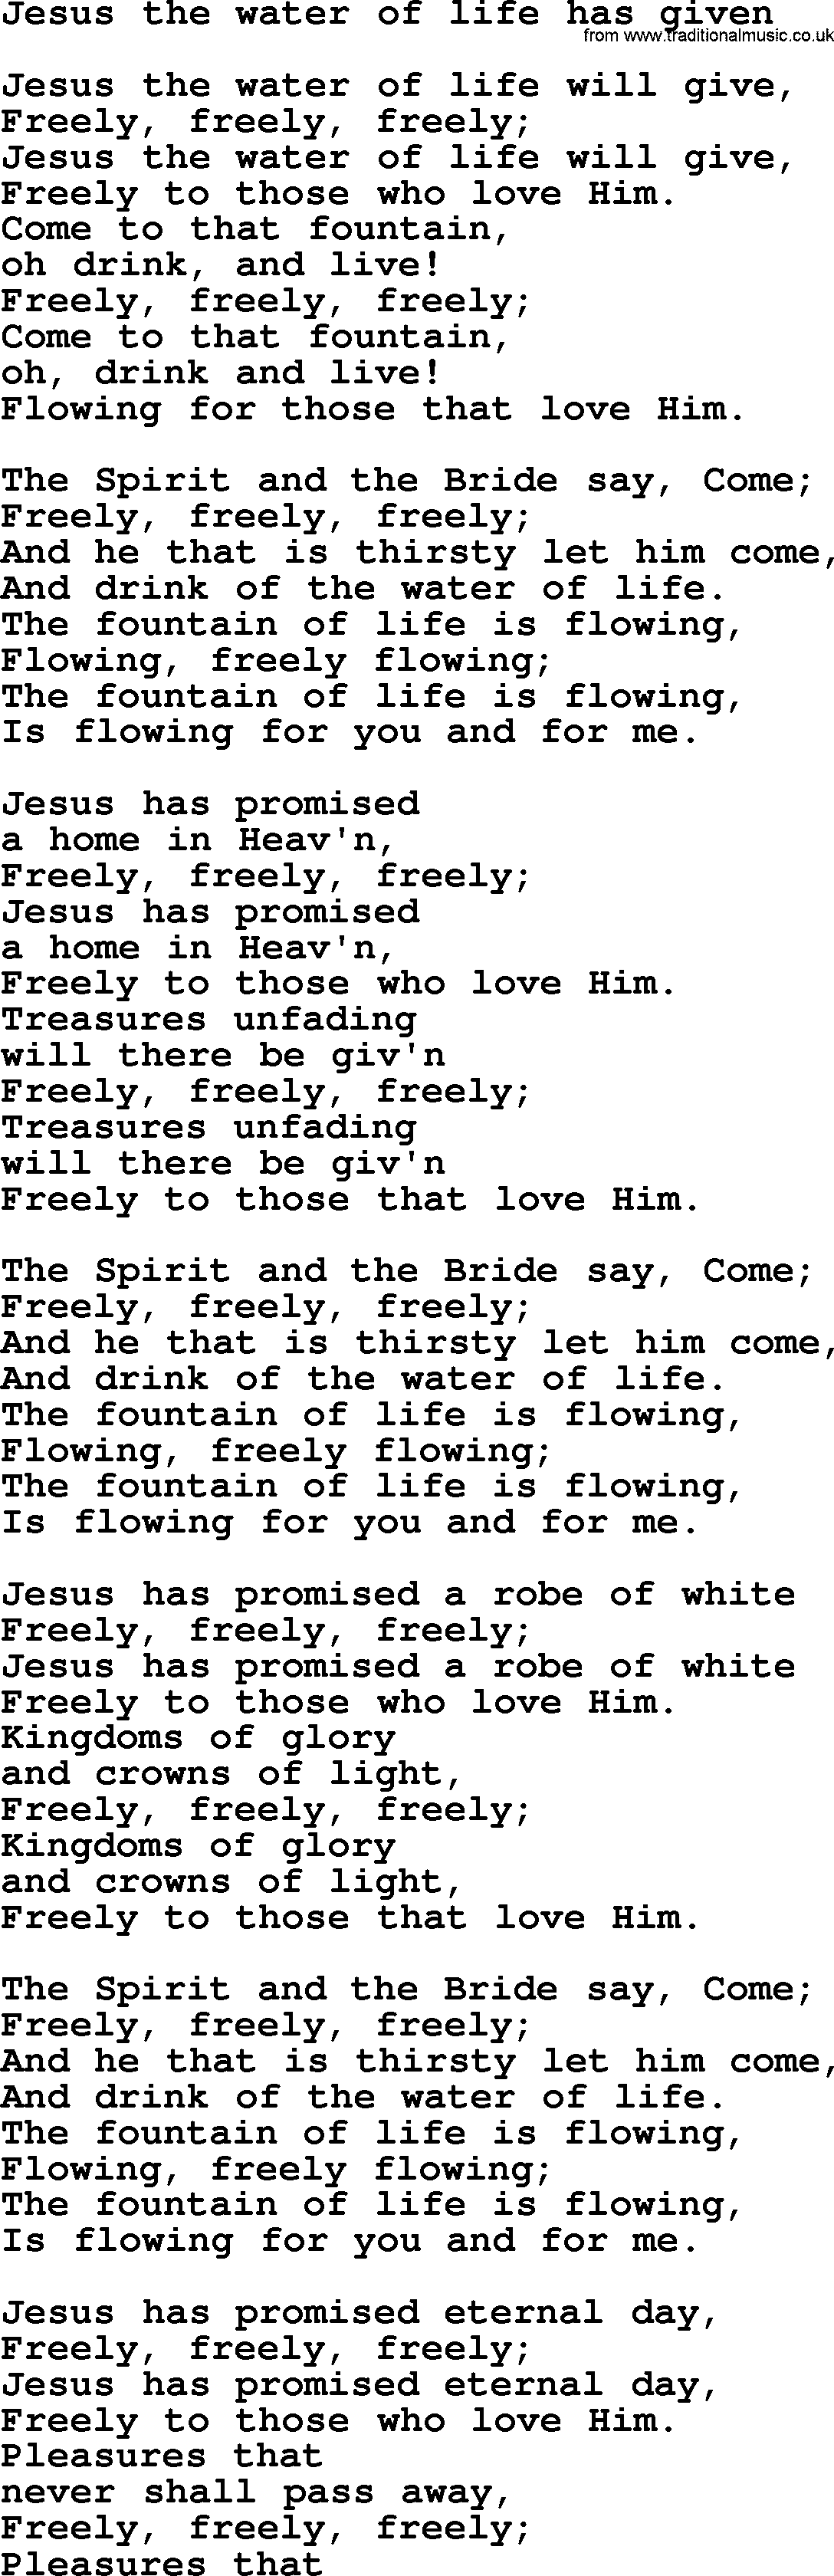 Sacred Songs and Solos complete, 1200 Hymns, title: Jesus The Water Of Life Has Given, lyrics and PDF